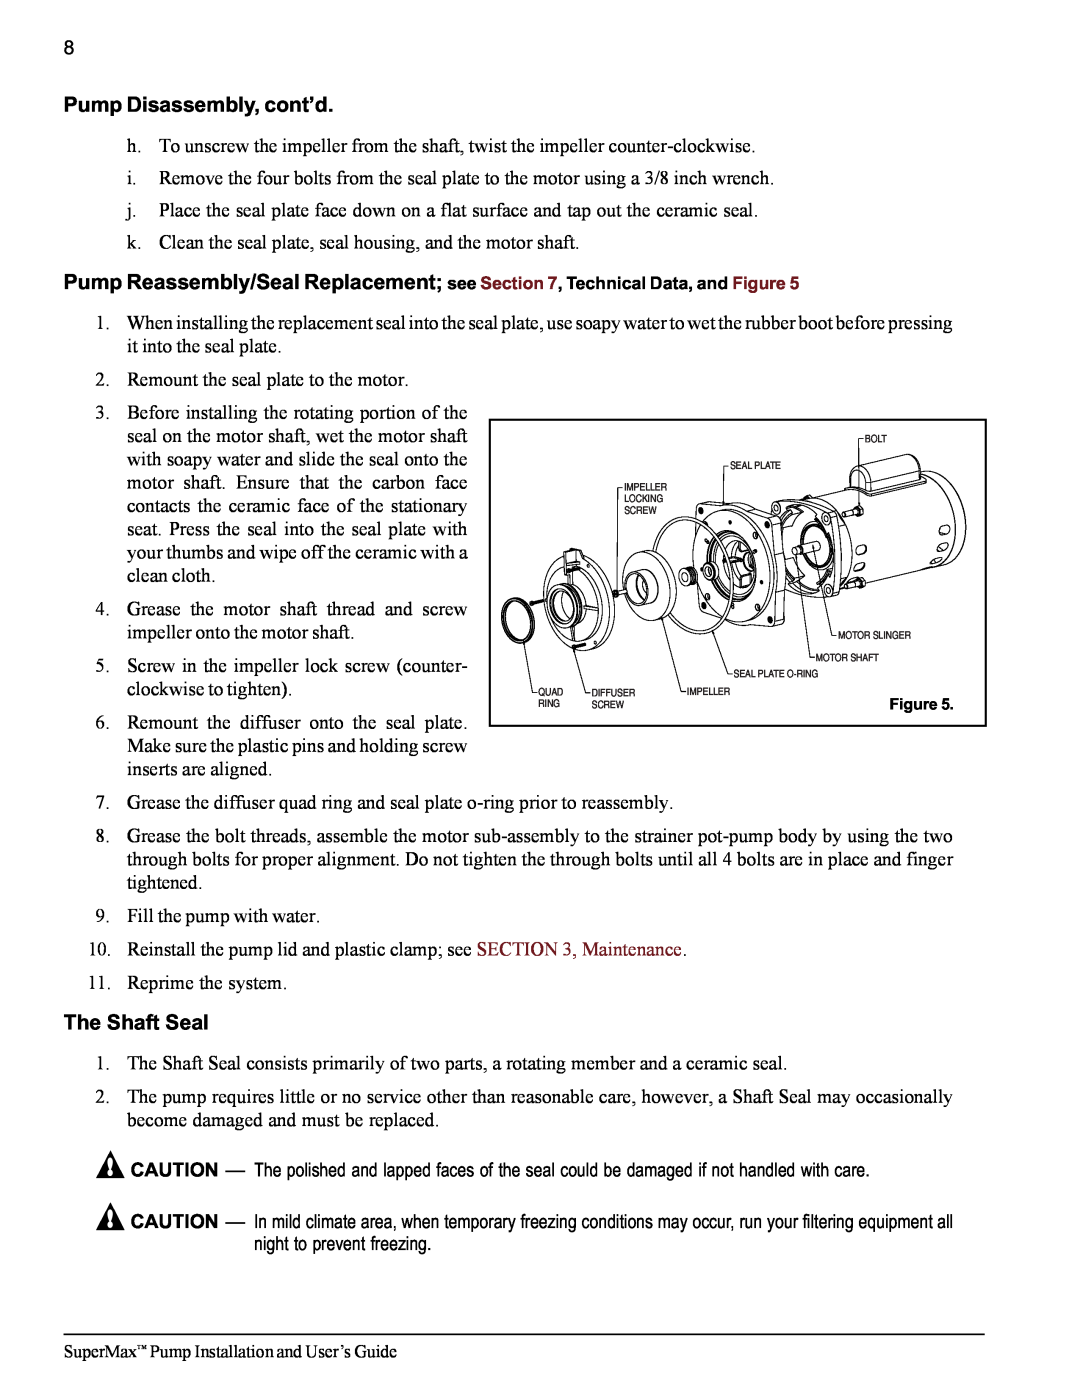 Pentair SuperMax important safety instructions Pump Disassembly, cont’d, The Shaft Seal 